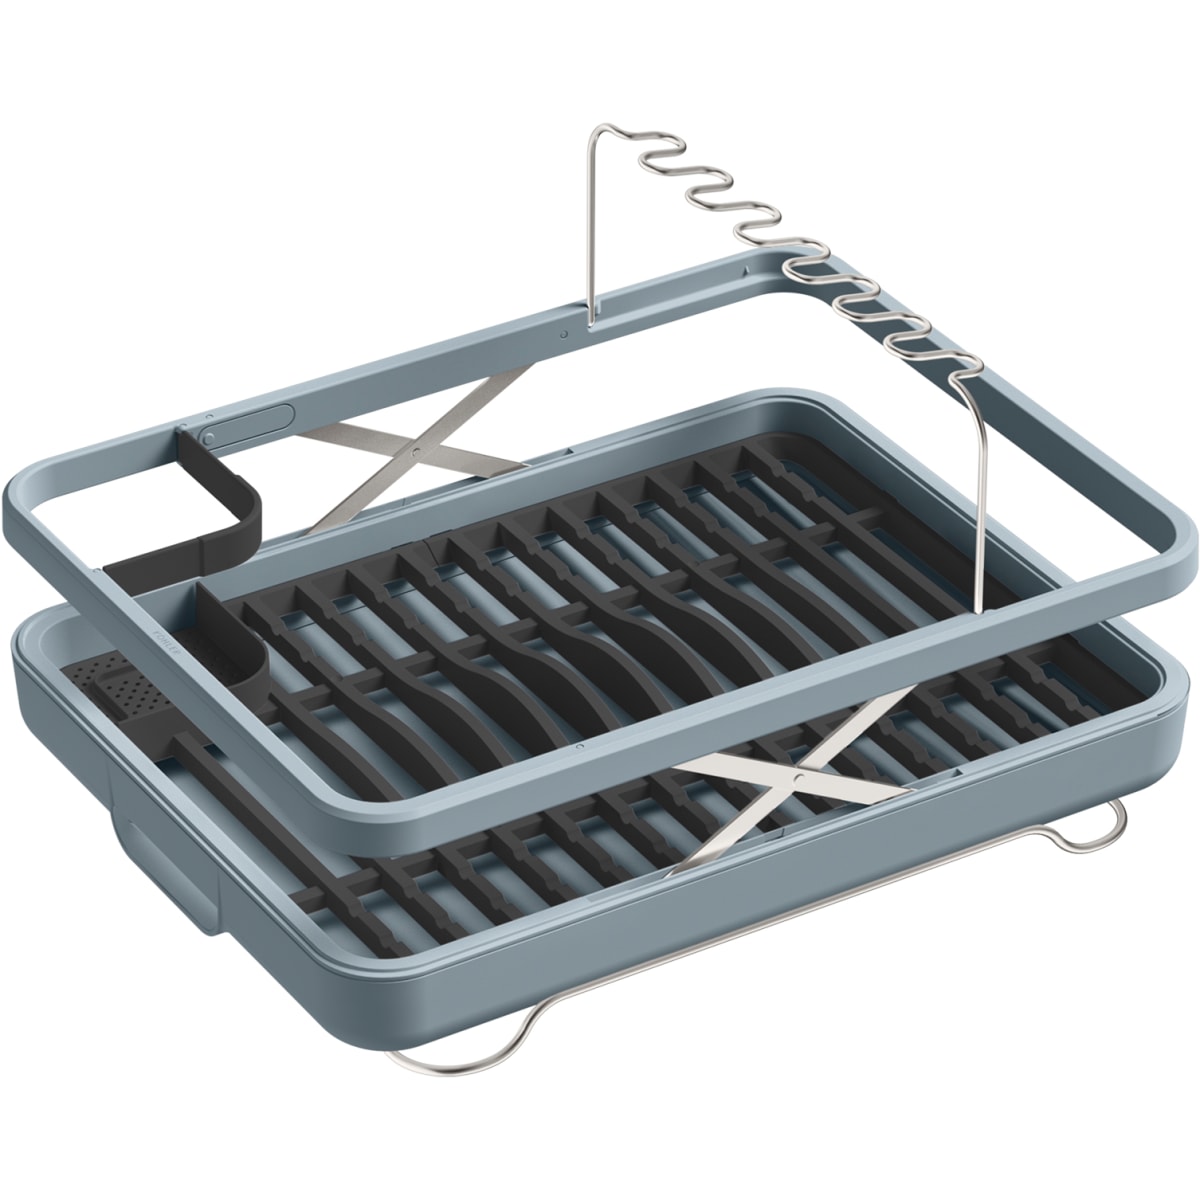 KOHLER Large Collapsible & Storable Dish Drying Rack with Wine Glass Holder  and Collapsible Utensil Band. Even Made to Hold Pots and Pans, Charcoal 